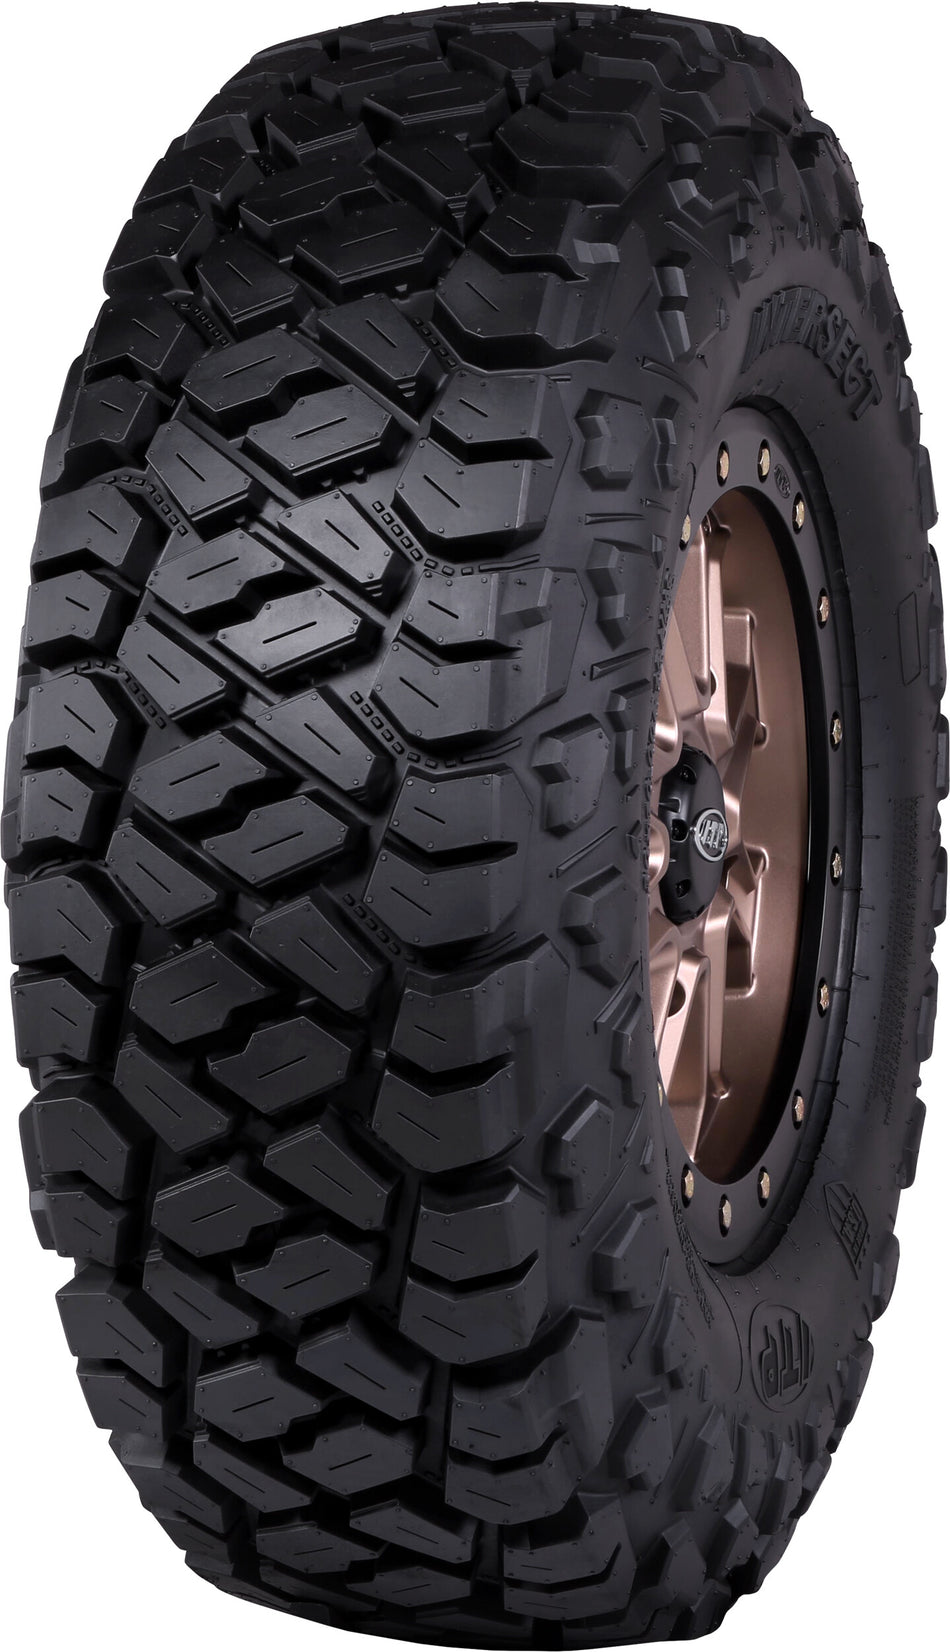 ITPTire Intersect Front/Rear 30x10r14 8-Ply6P1789